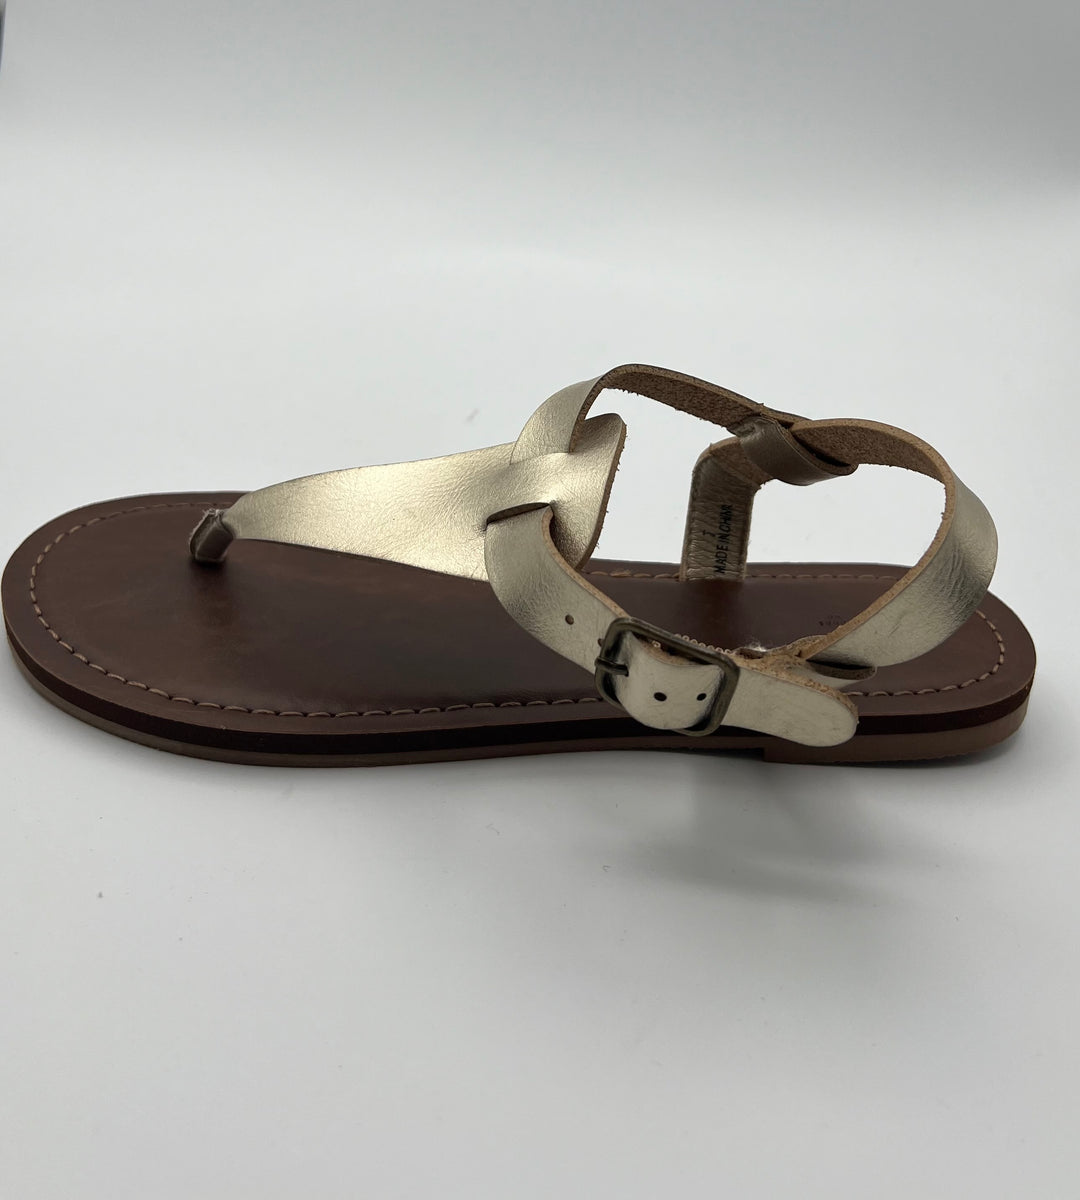 Gold Thong Sandals - Size 7